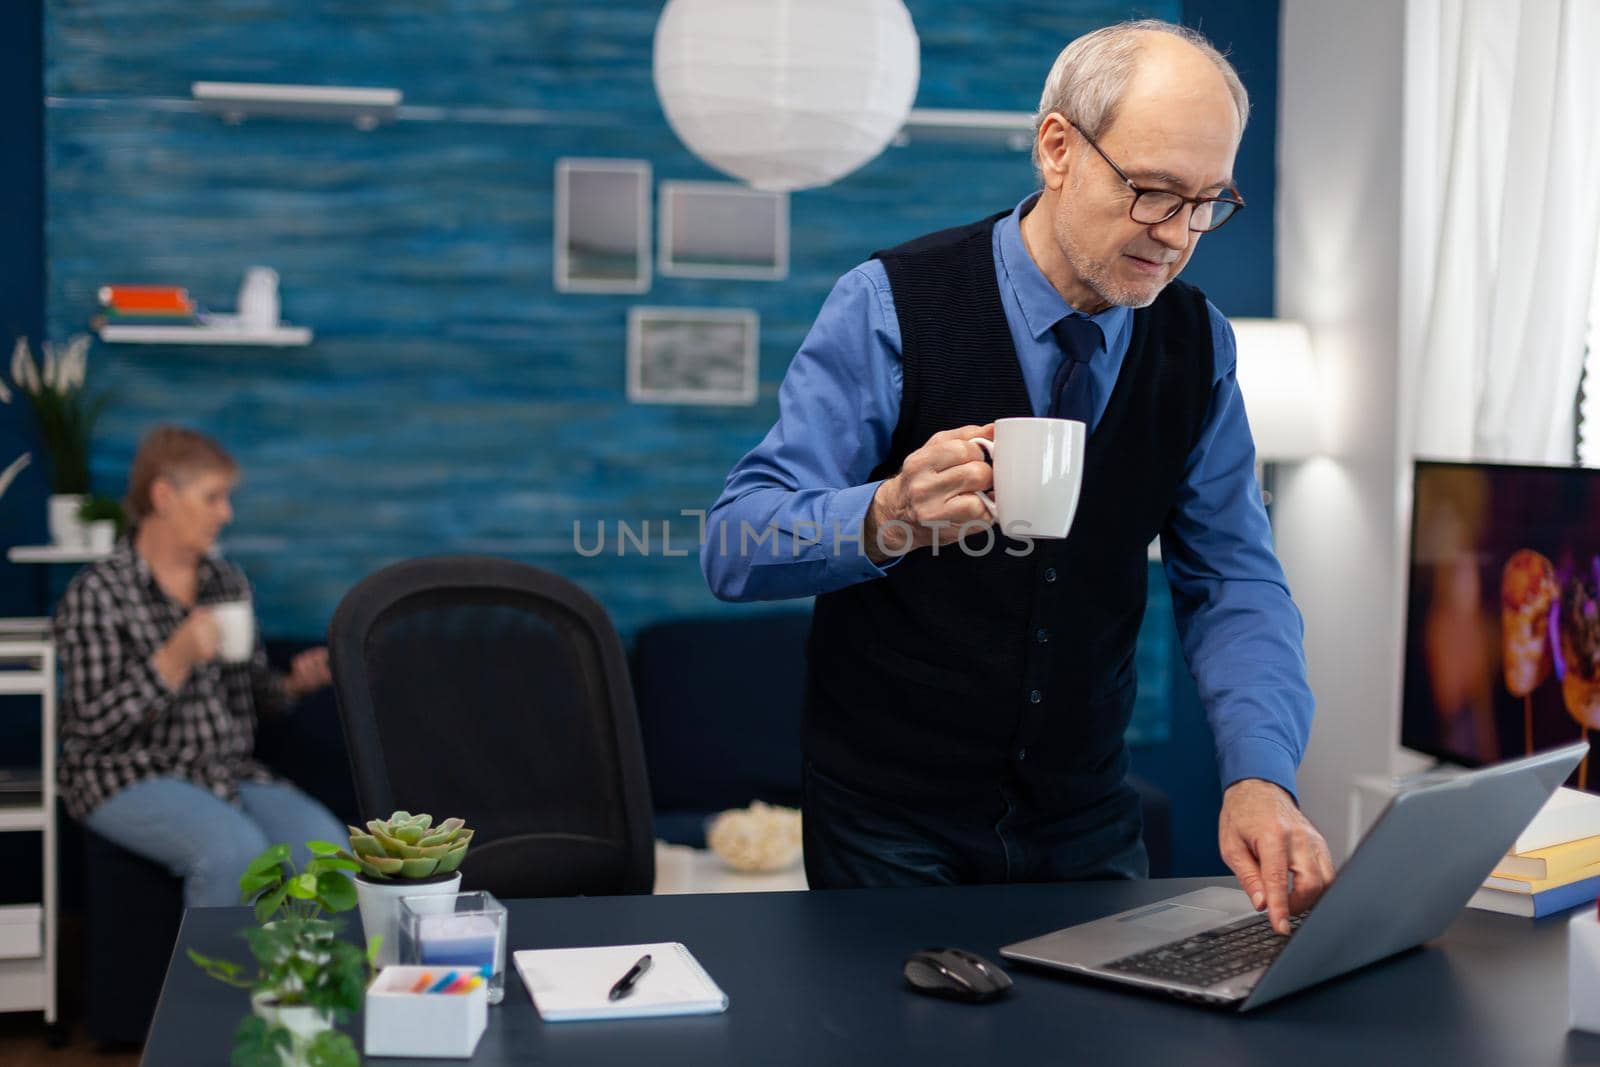 Retired businessman turning on laptop enjoying a cup of coffee. Elderly man entrepreneur in home workplace using portable computer sitting at desk while wife is holding tv remote.